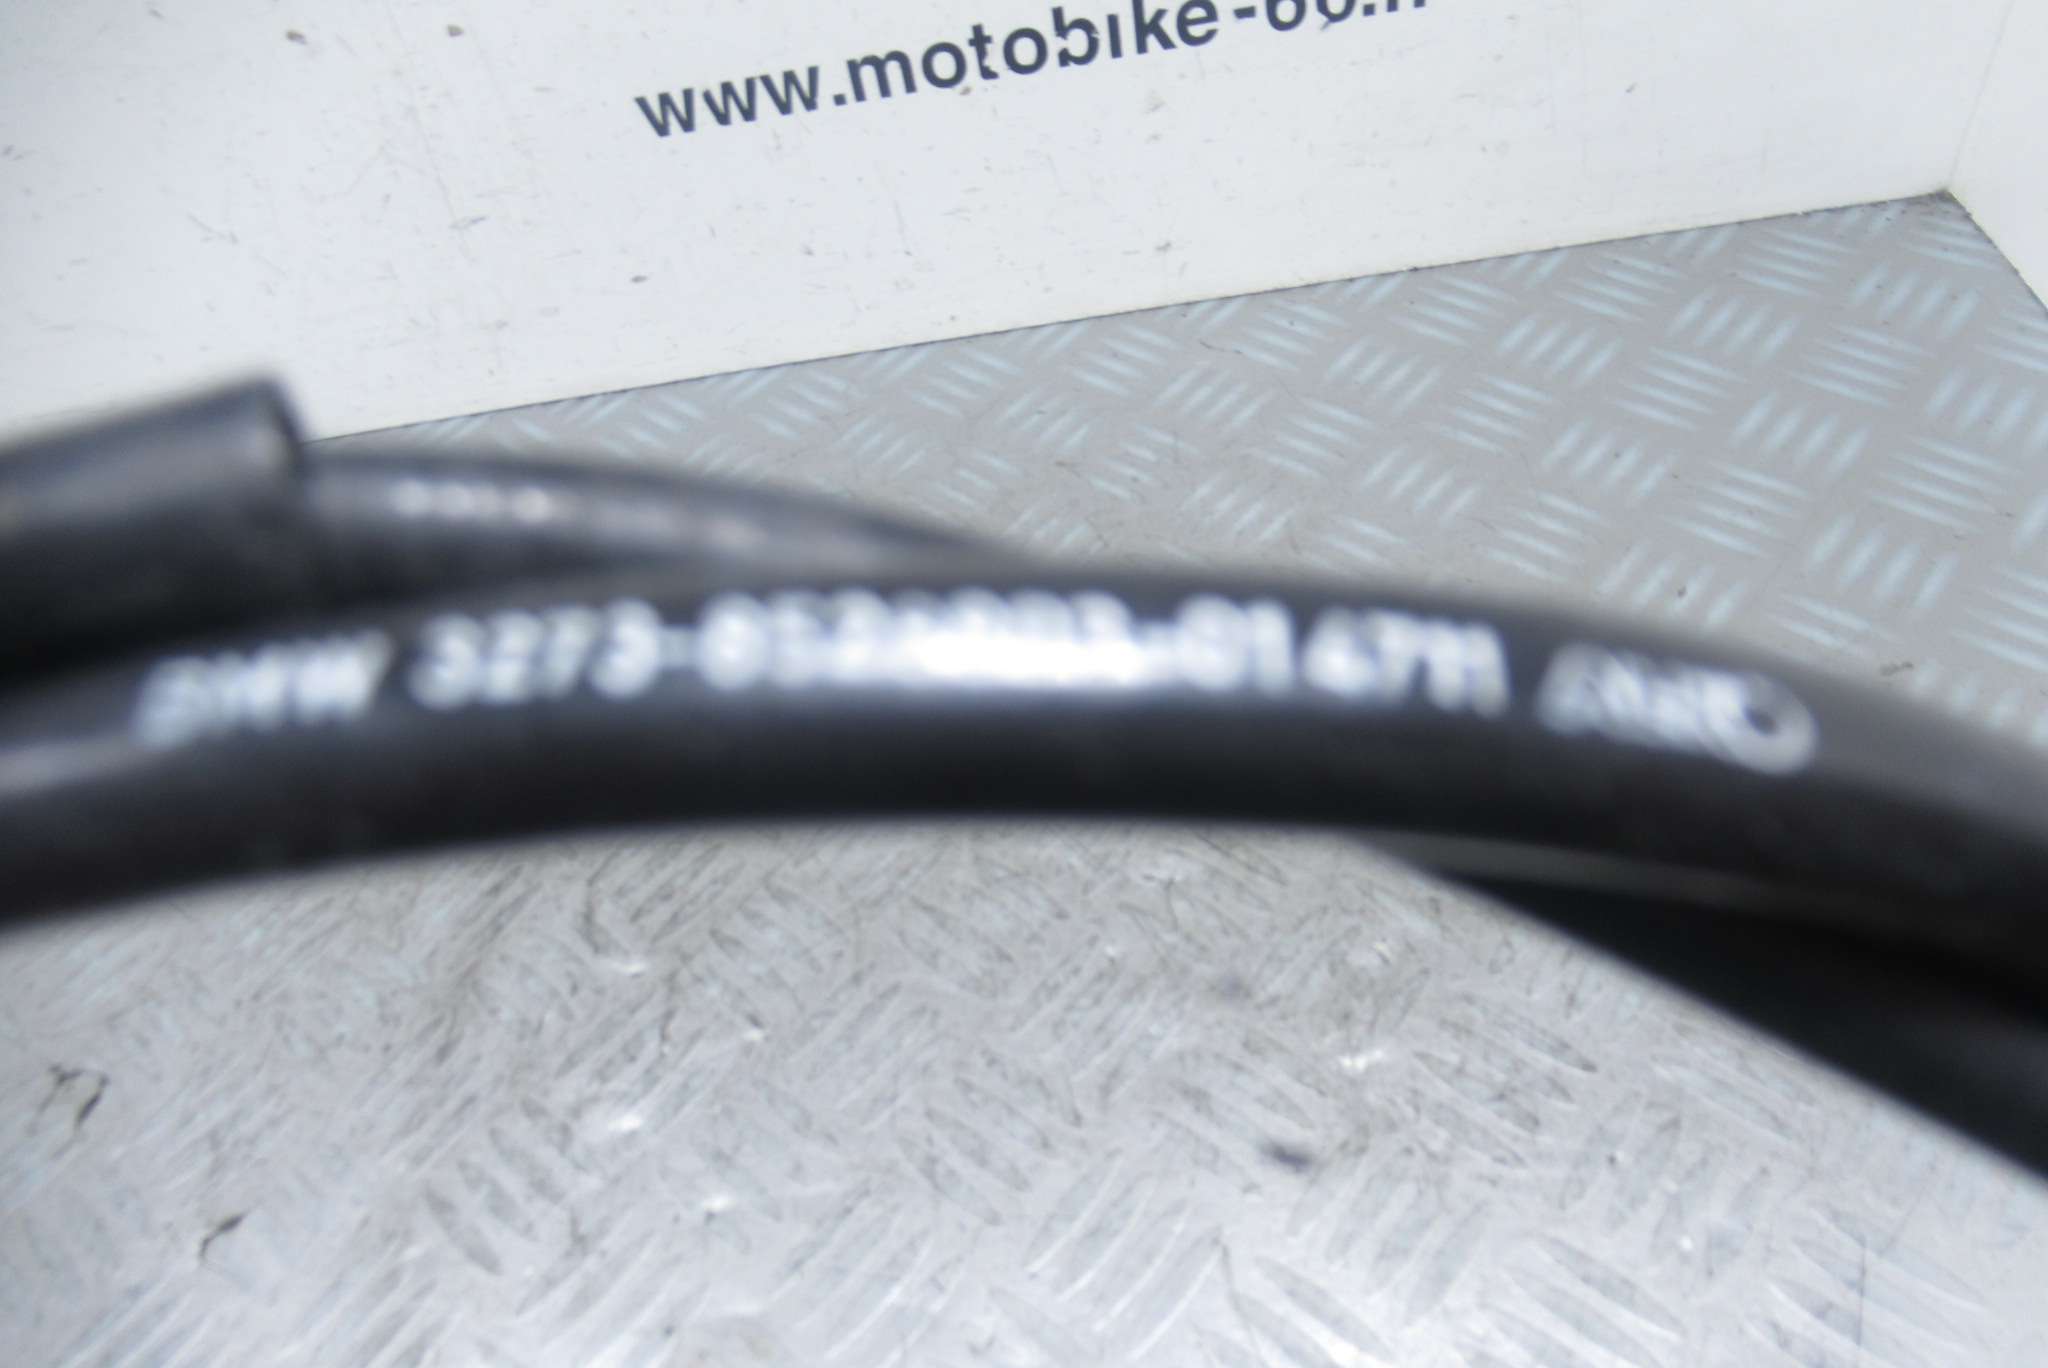 Cable embrayage BMW S1000RR 4t (8528803-01)